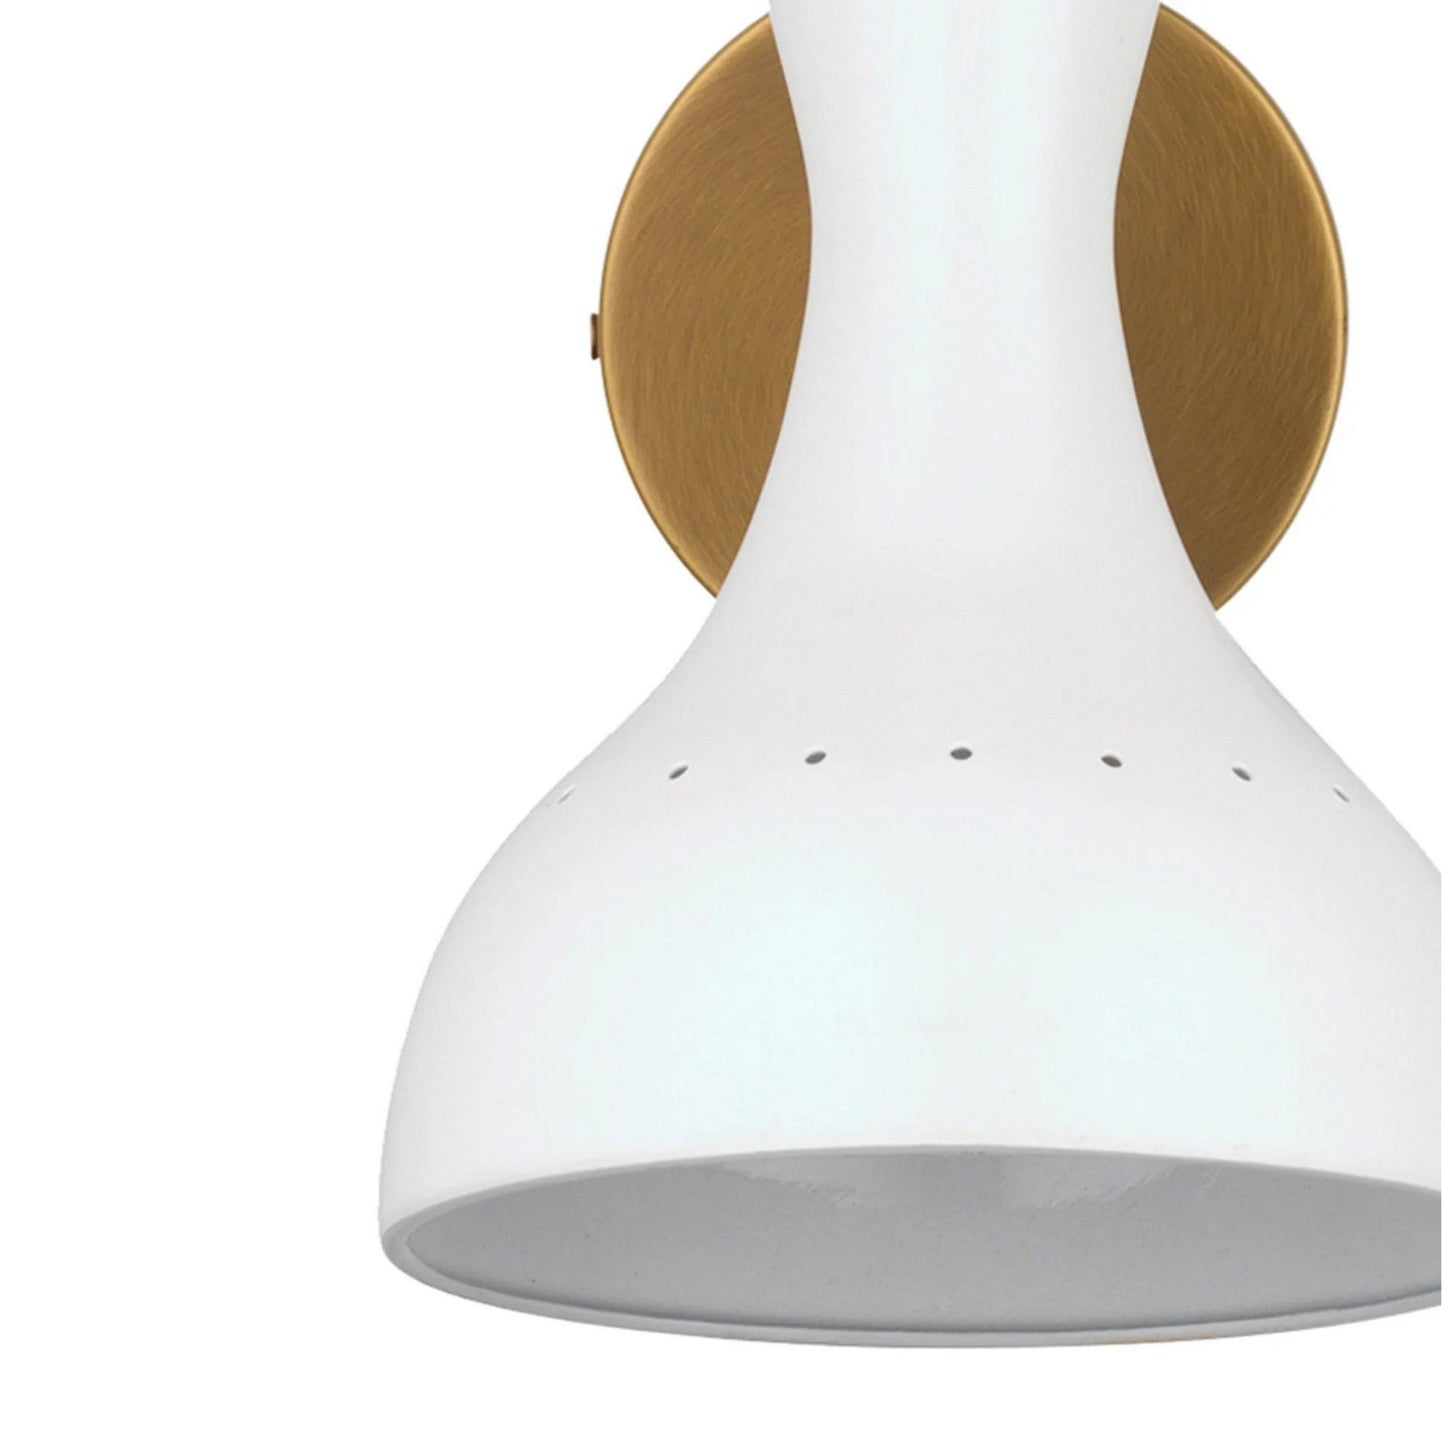 Jamie Young Pisa 6" x 11" 2-Light White and Antique Brass Metal Wall Sconce With Hourglass-Shaped Swivel Hood